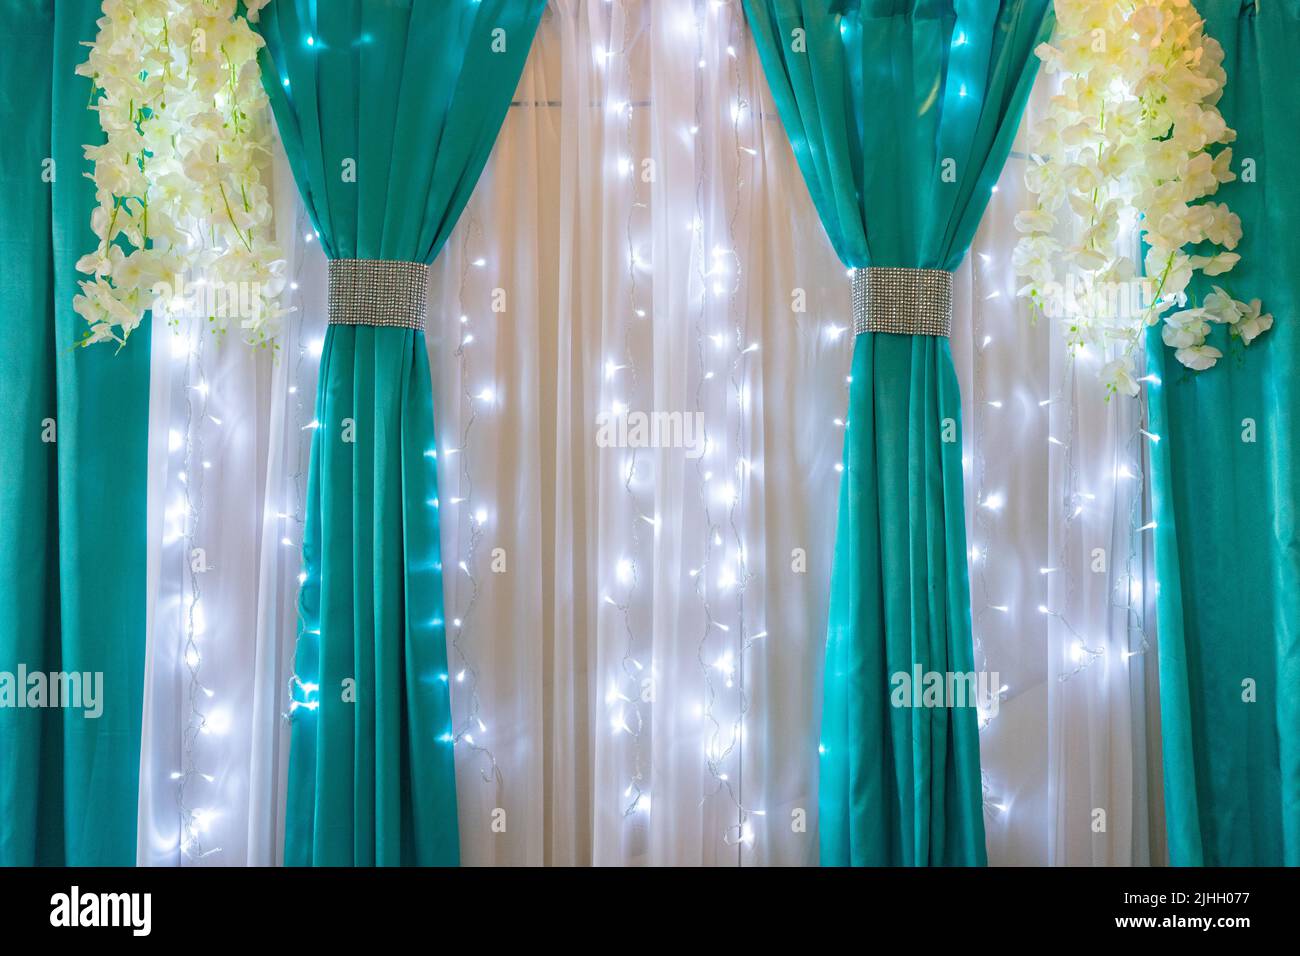 Decoration of the banquet hall with white and turquoise fabric illuminated with garlands. Stock Photo